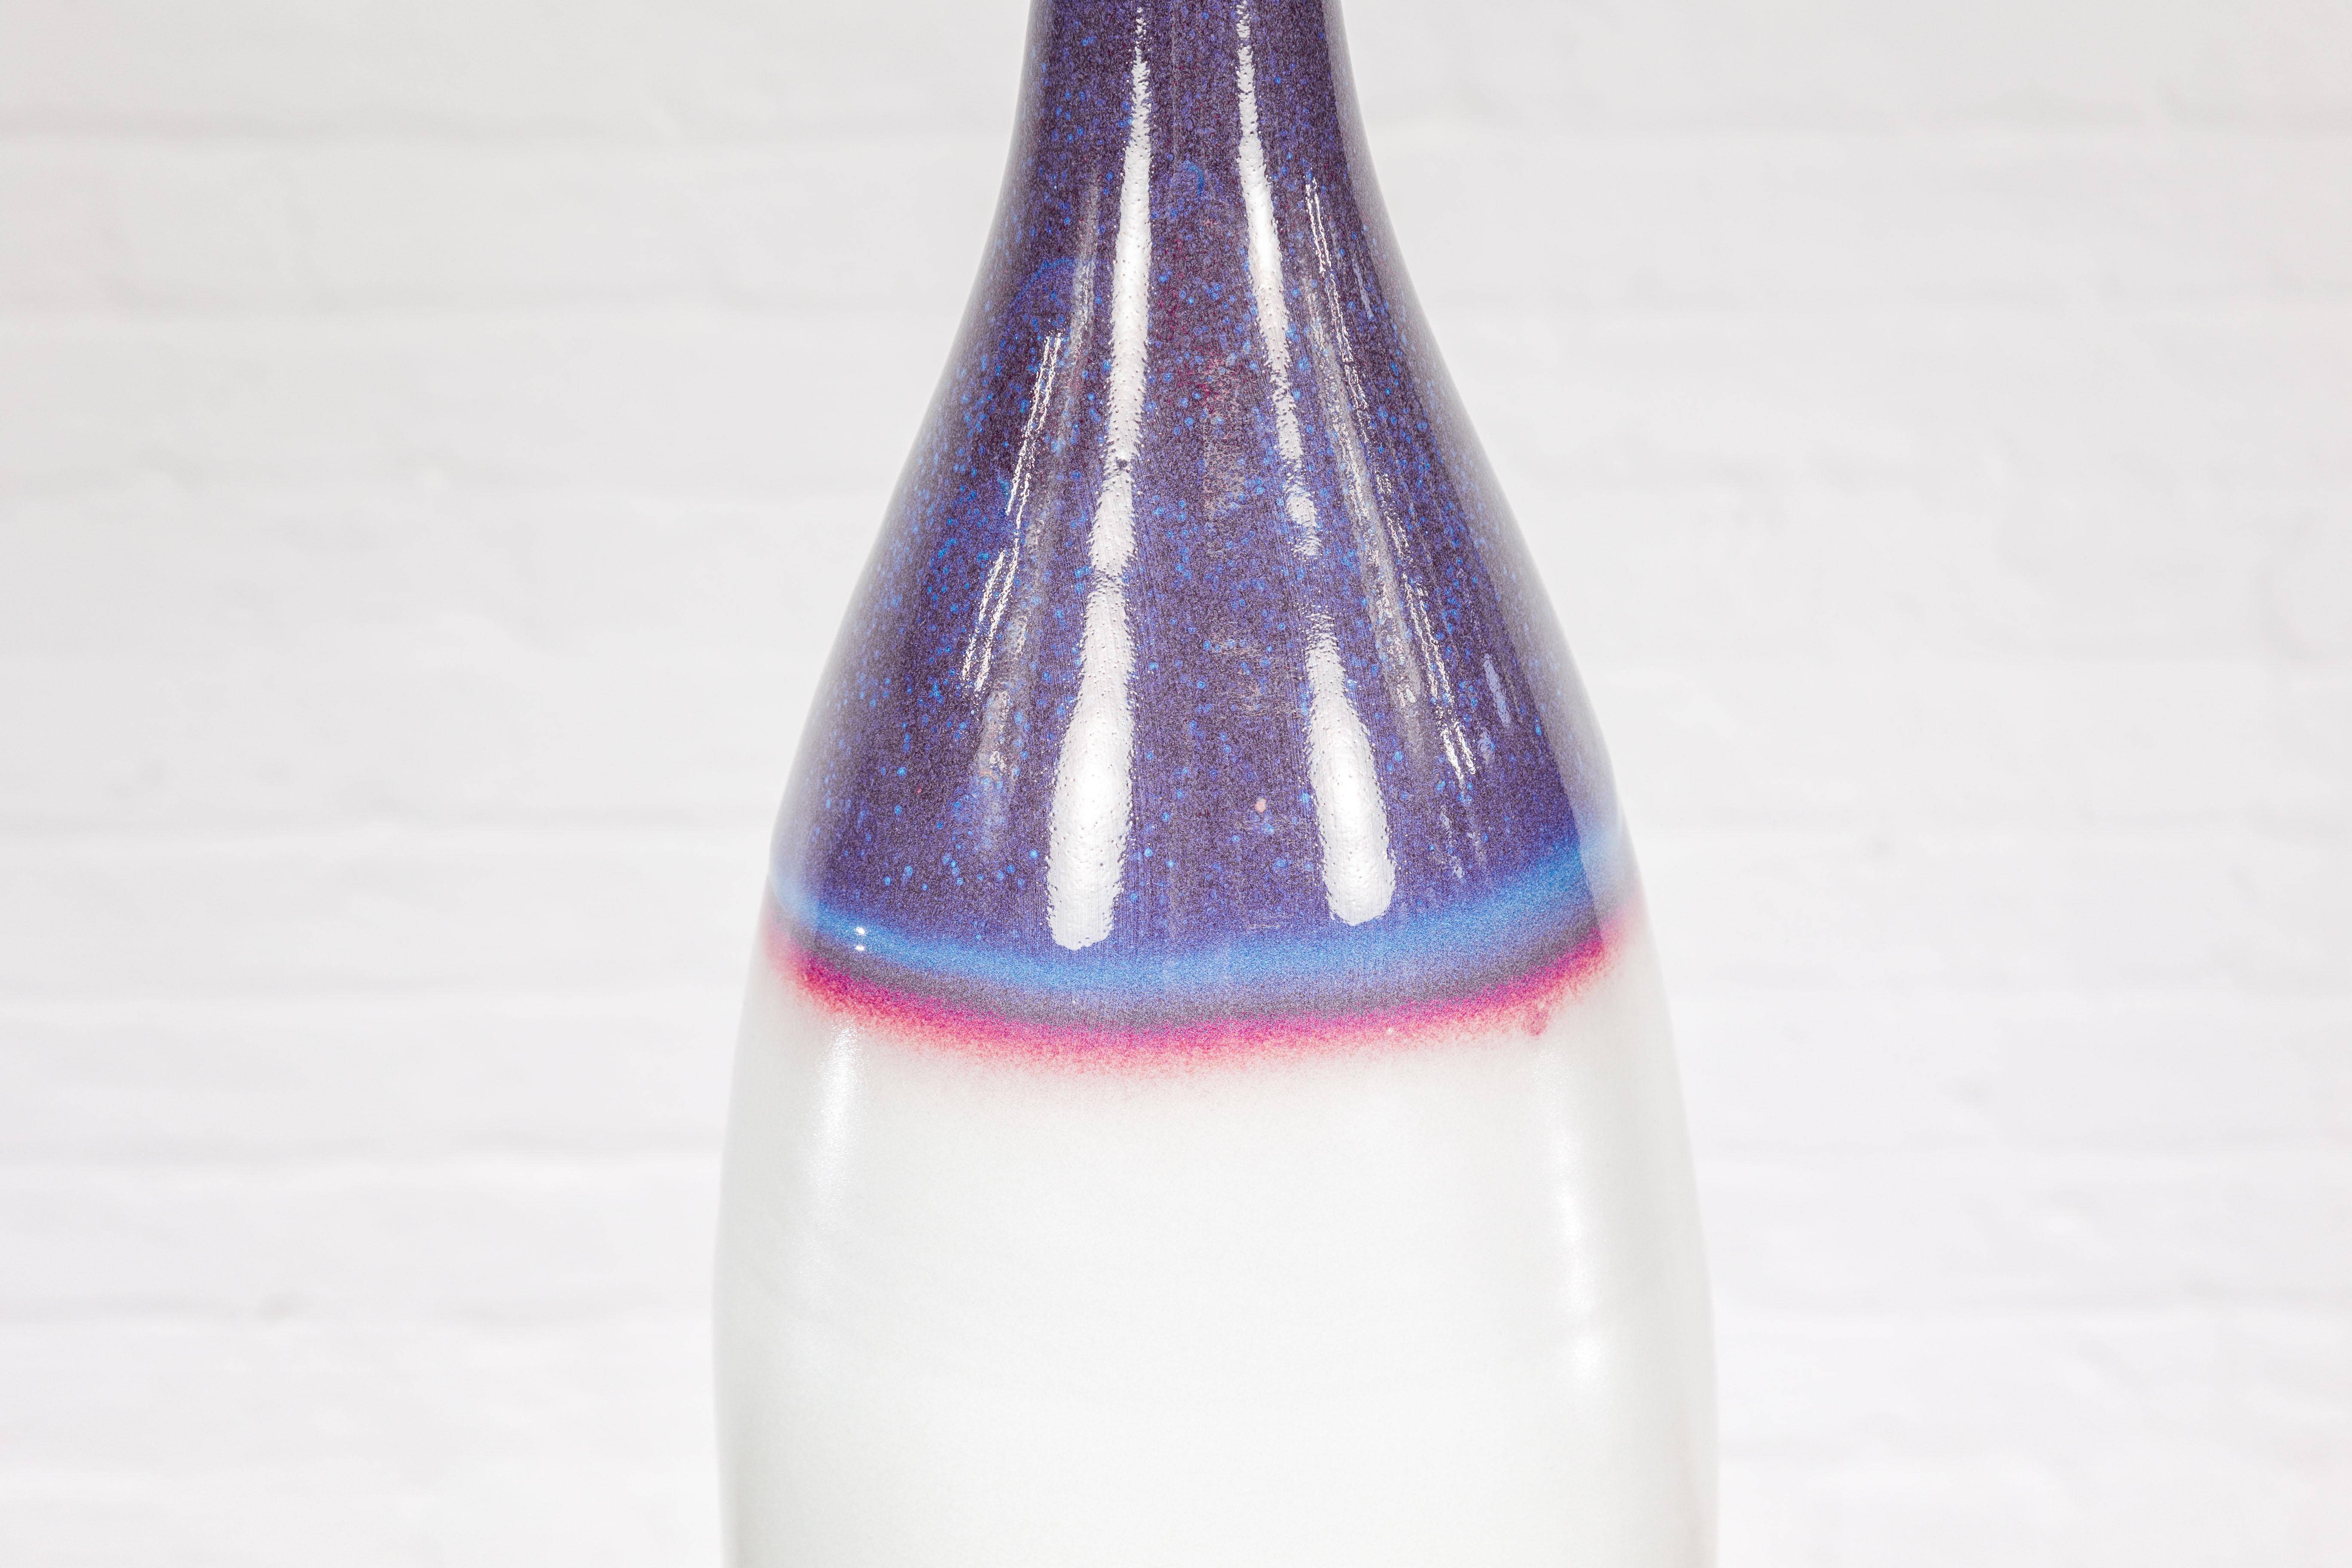 Multicolor Ceramic Bottle Base with Purple, Blue, Pink and White Tones For Sale 1